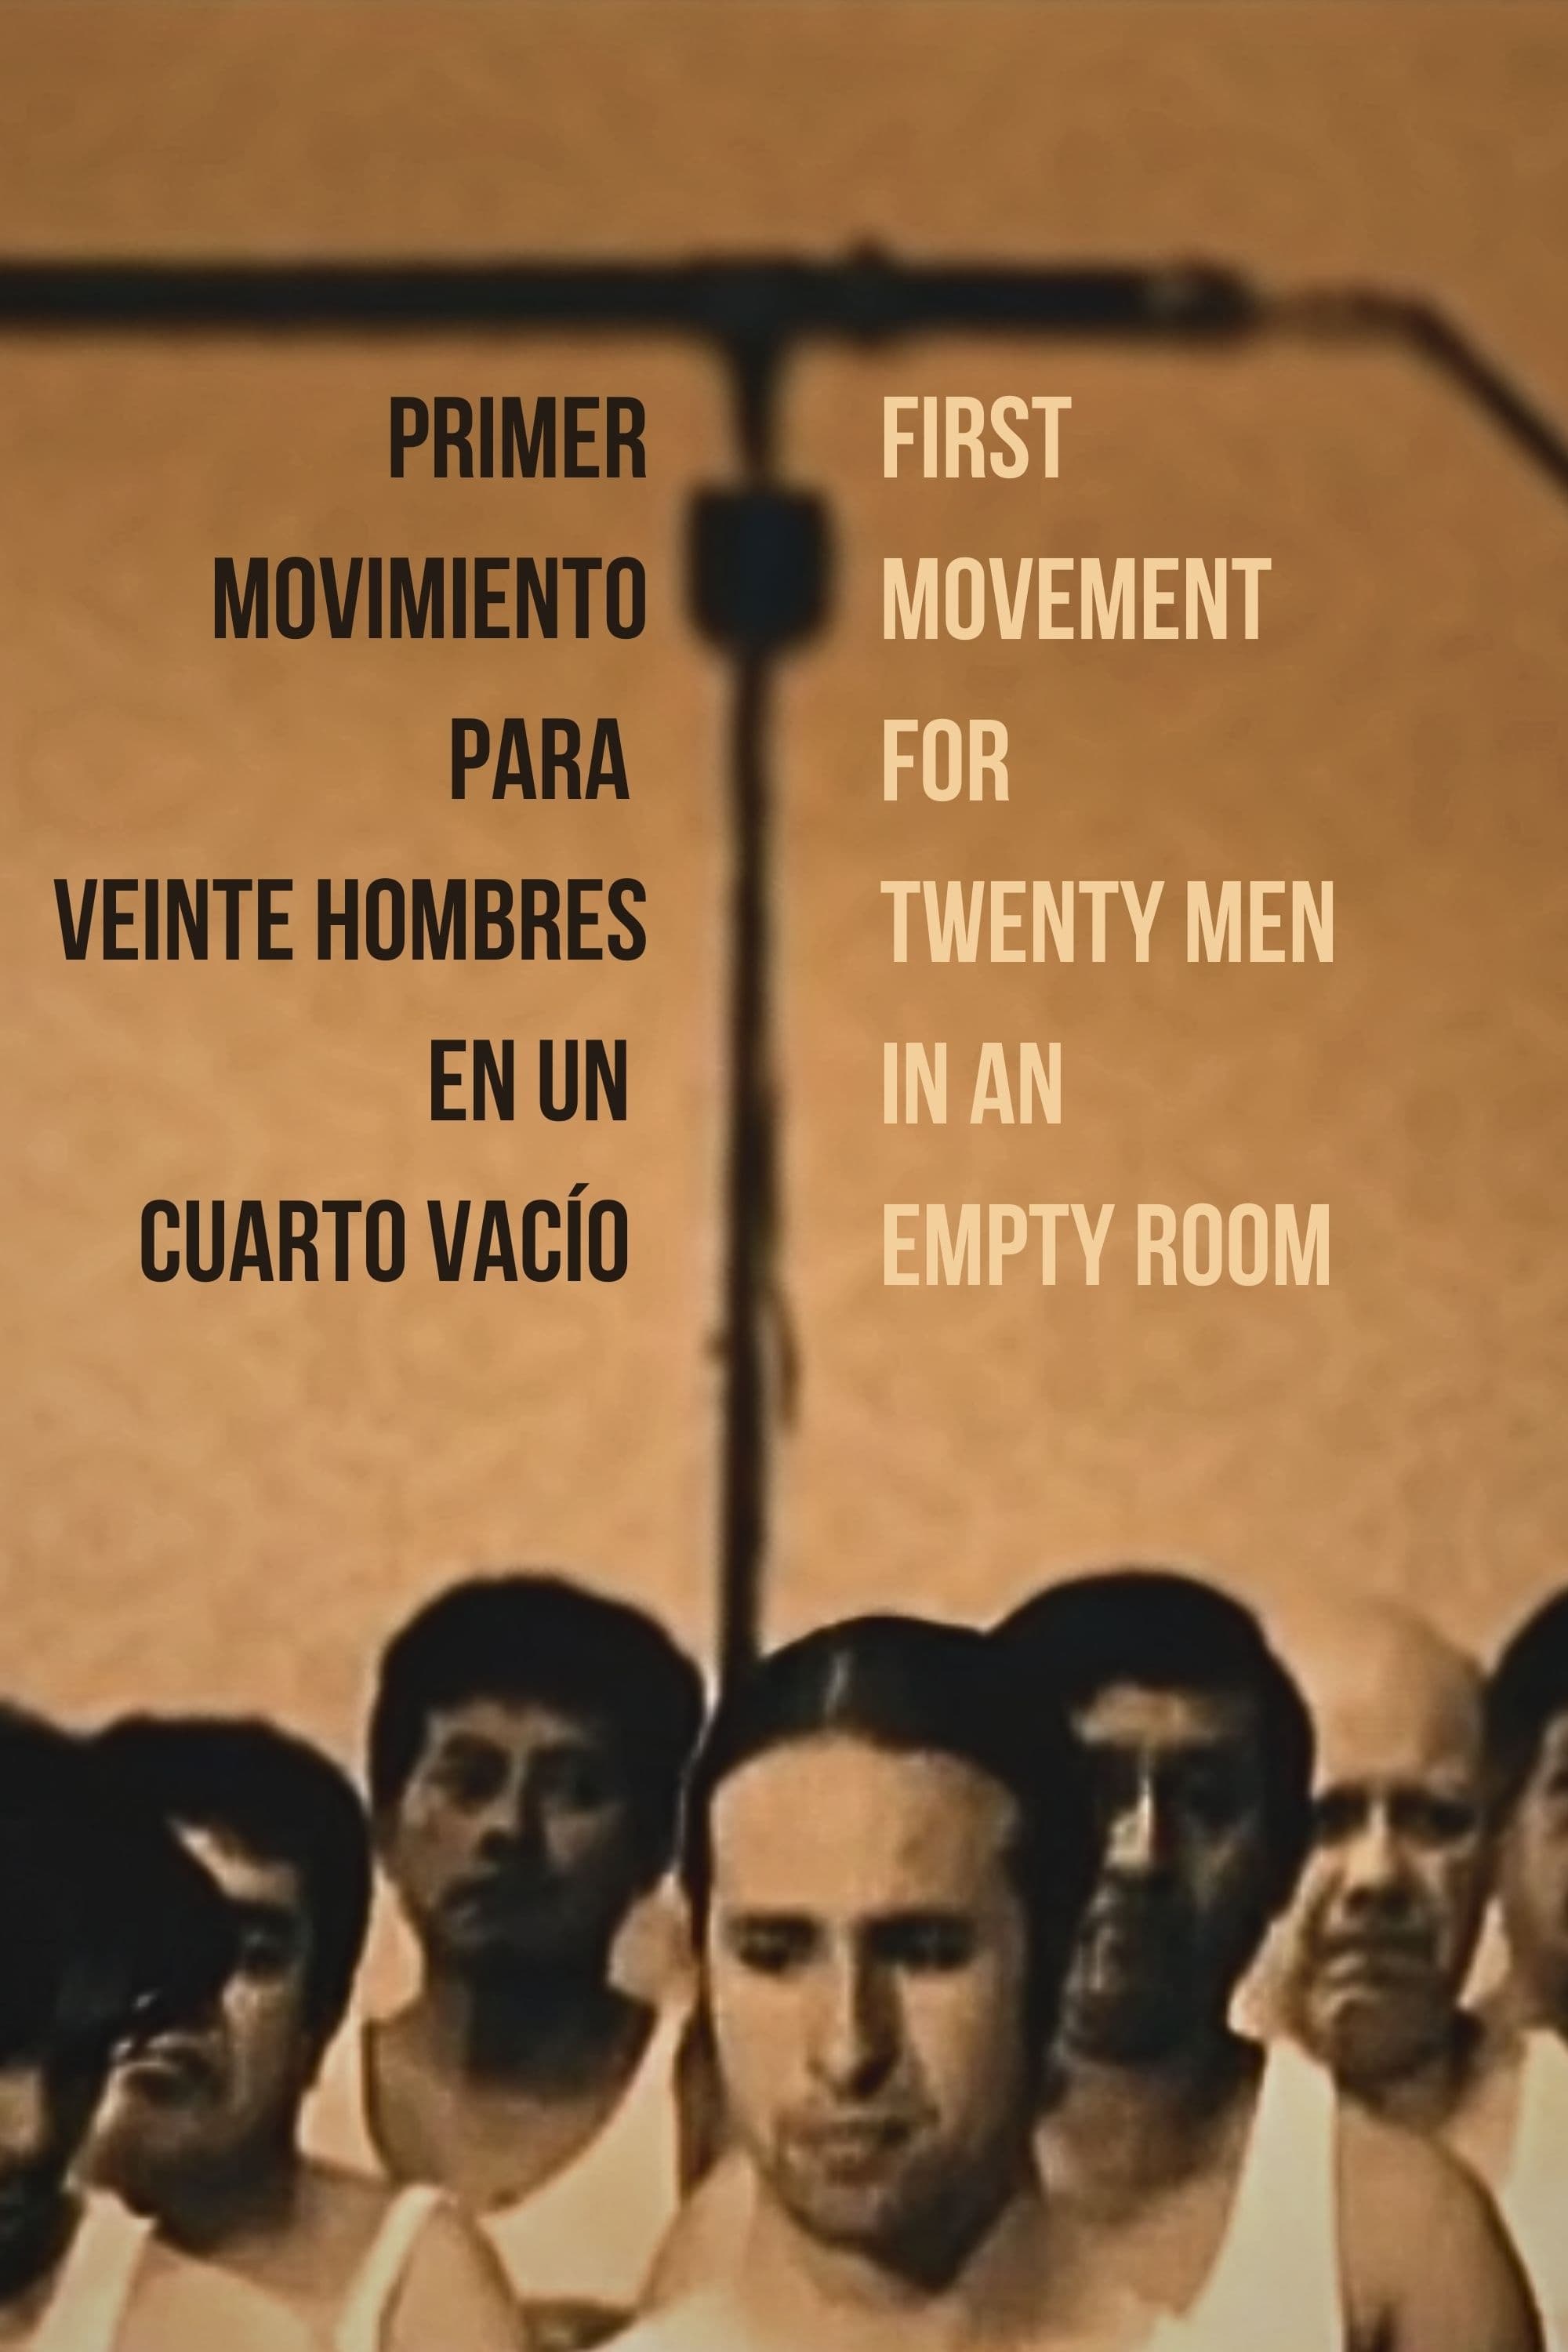 First Movement for Twenty Men in an Empty Room